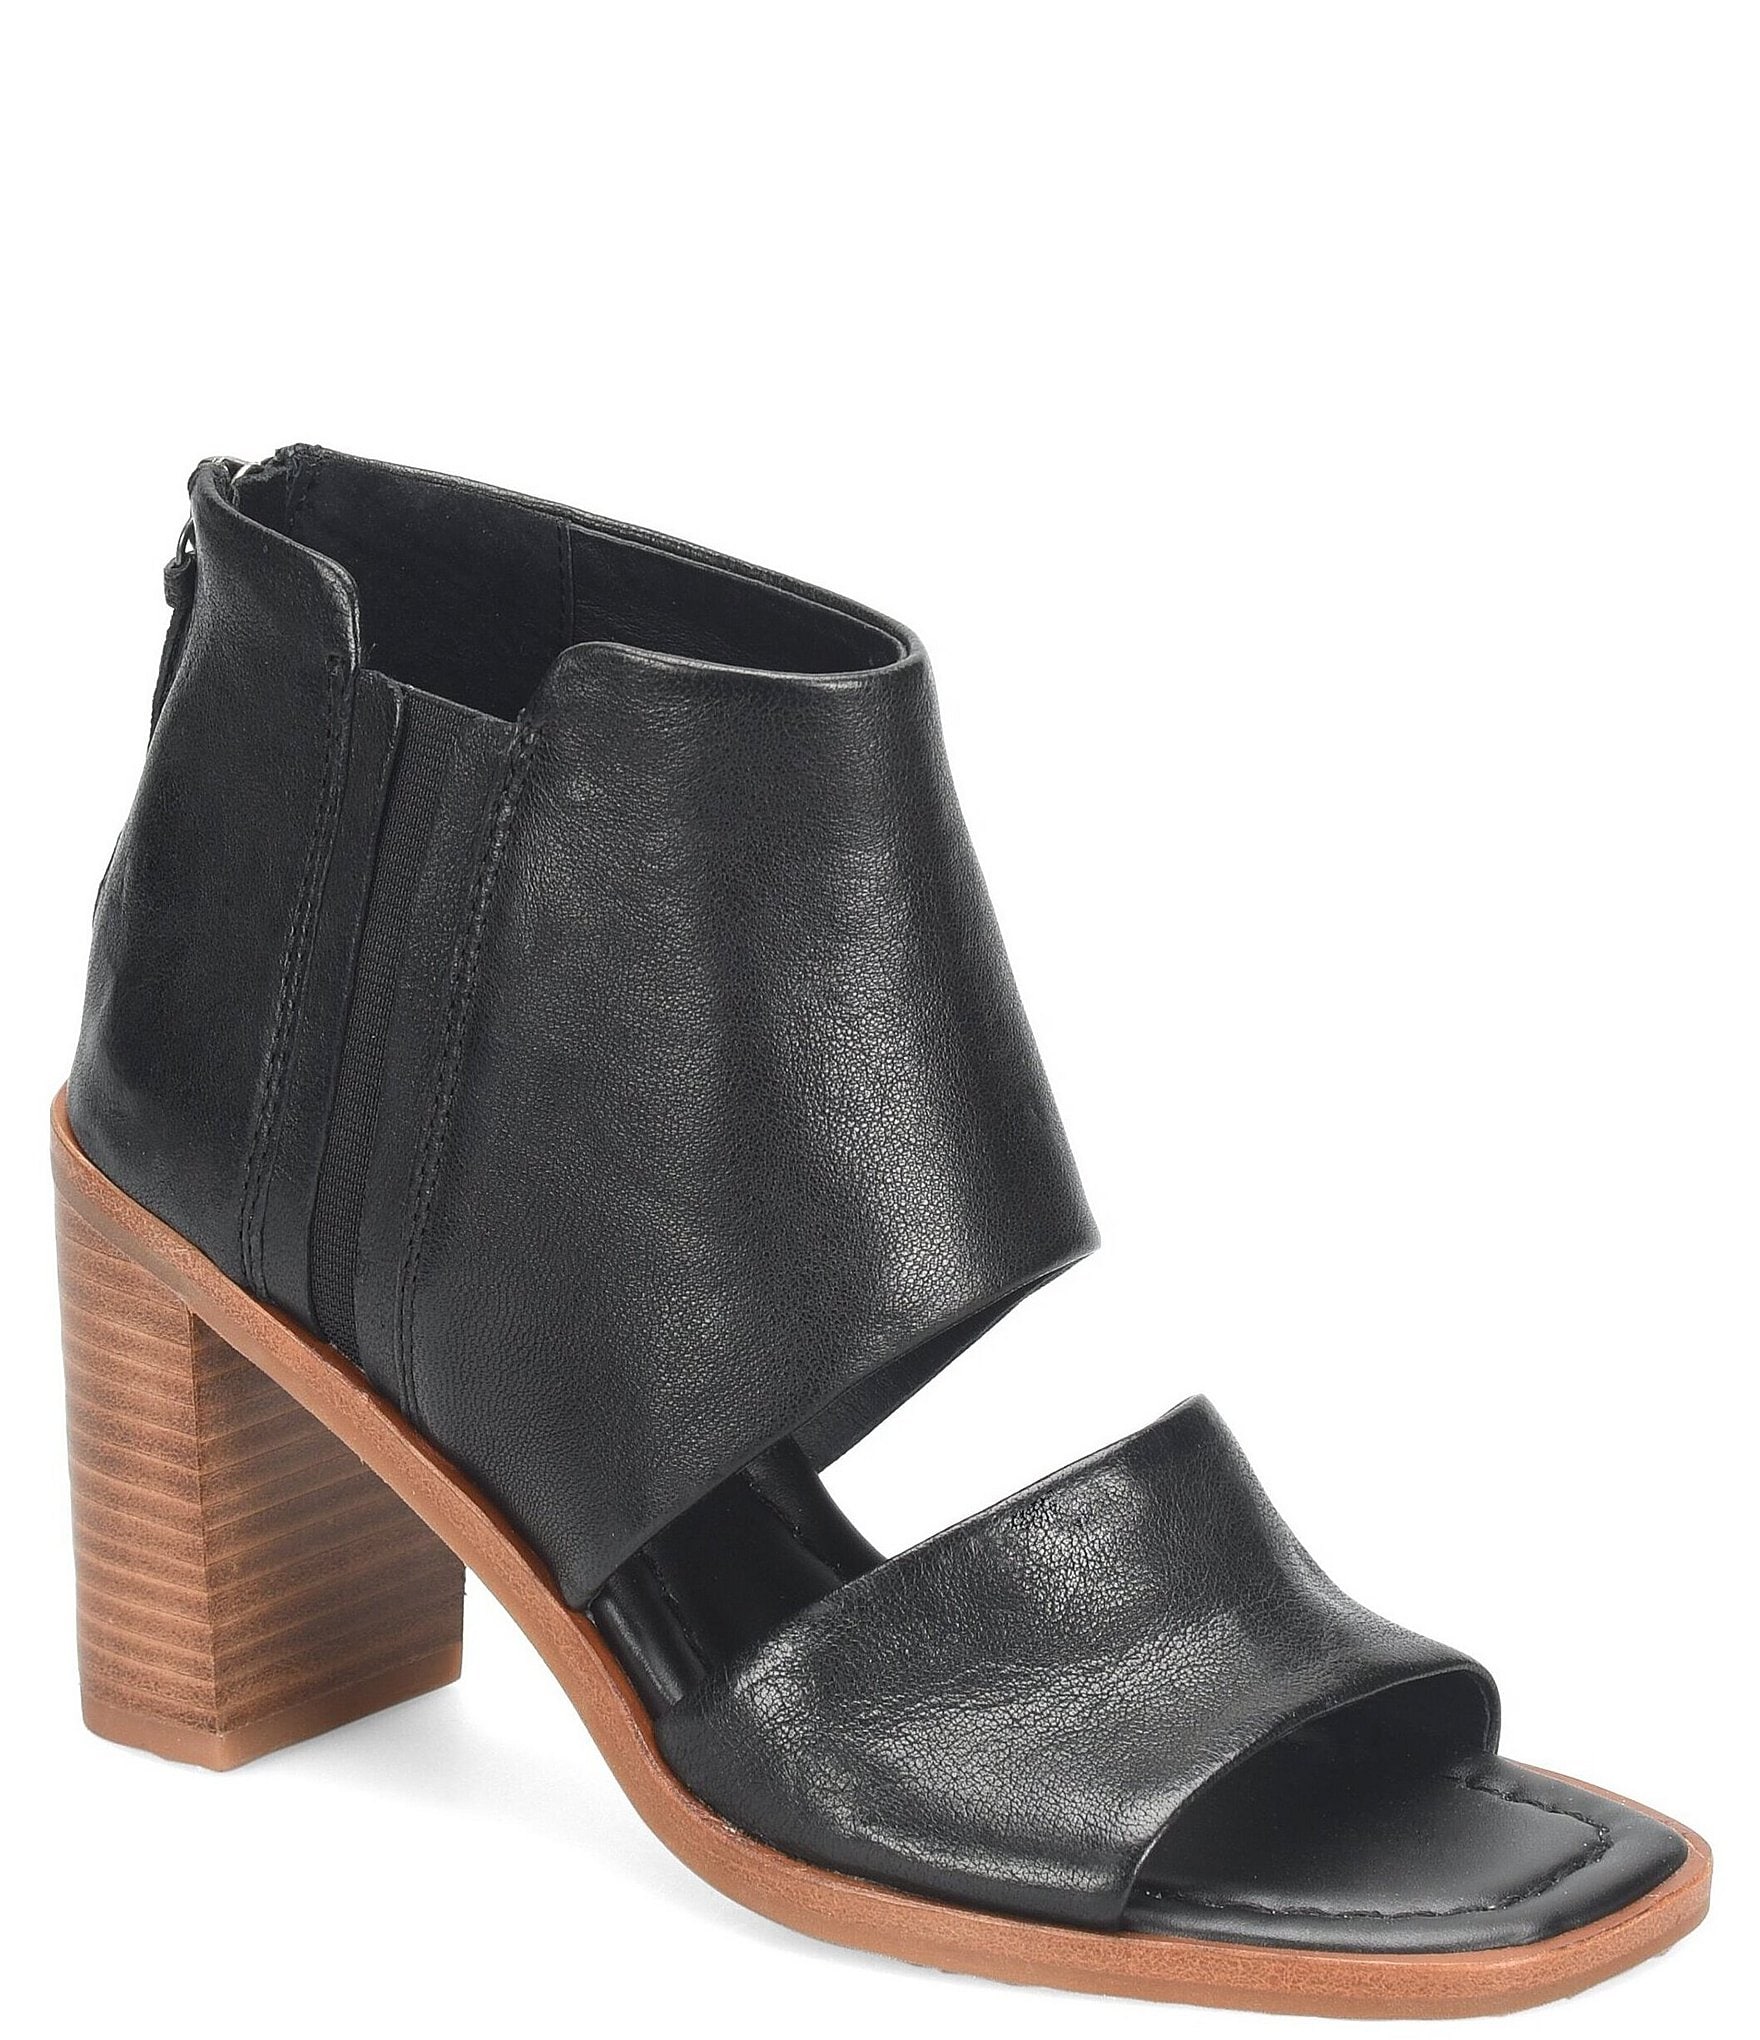 Sofft Sinclair Leather Cut-Out Sandal Booties | Dillard's